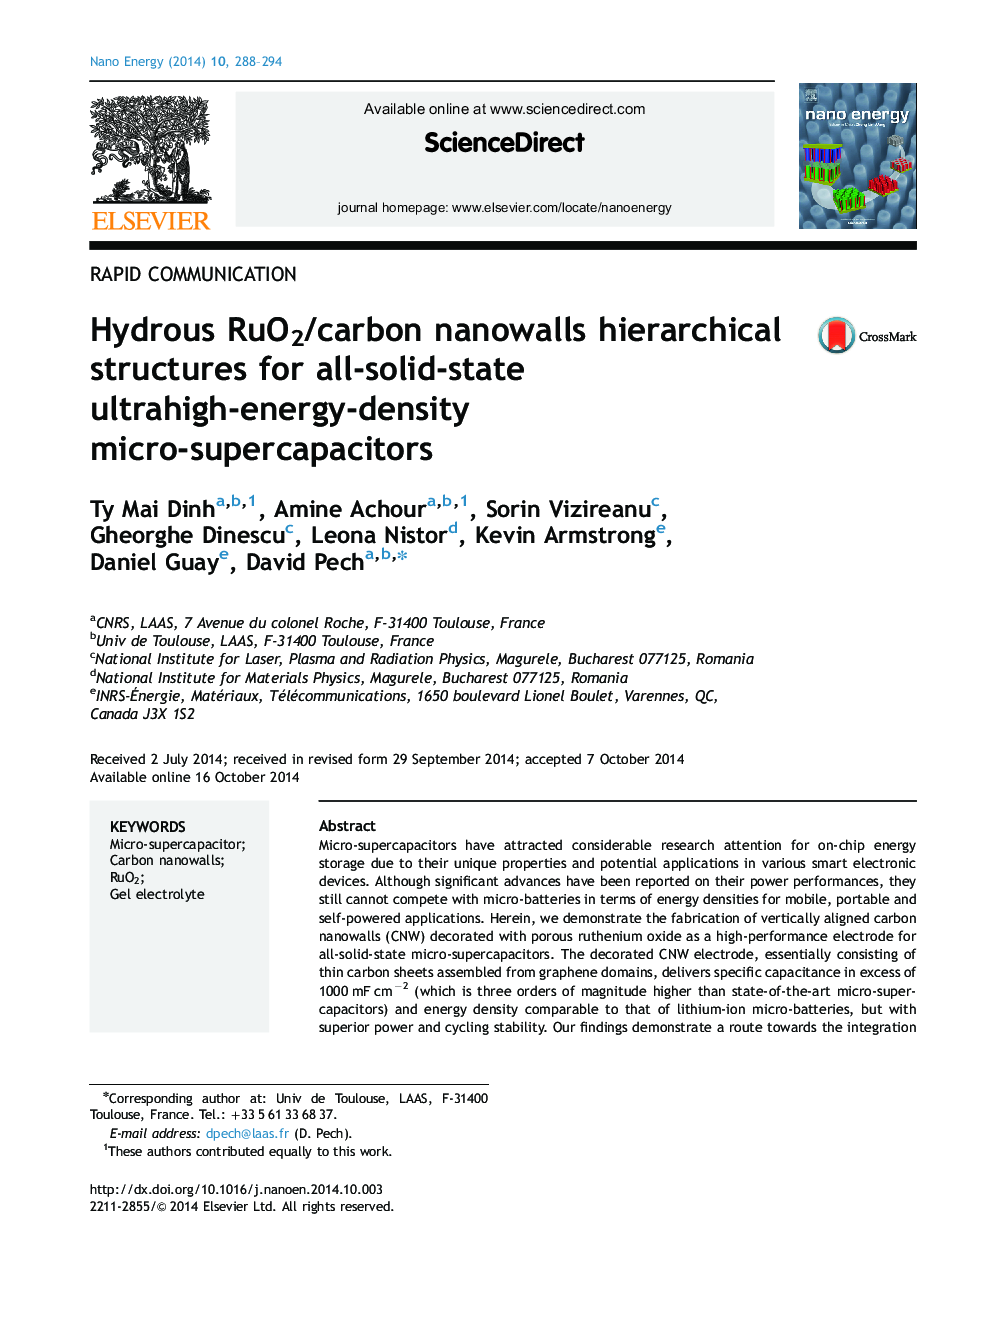 Hydrous RuO2/carbon nanowalls hierarchical structures for all-solid-state ultrahigh-energy-density micro-supercapacitors